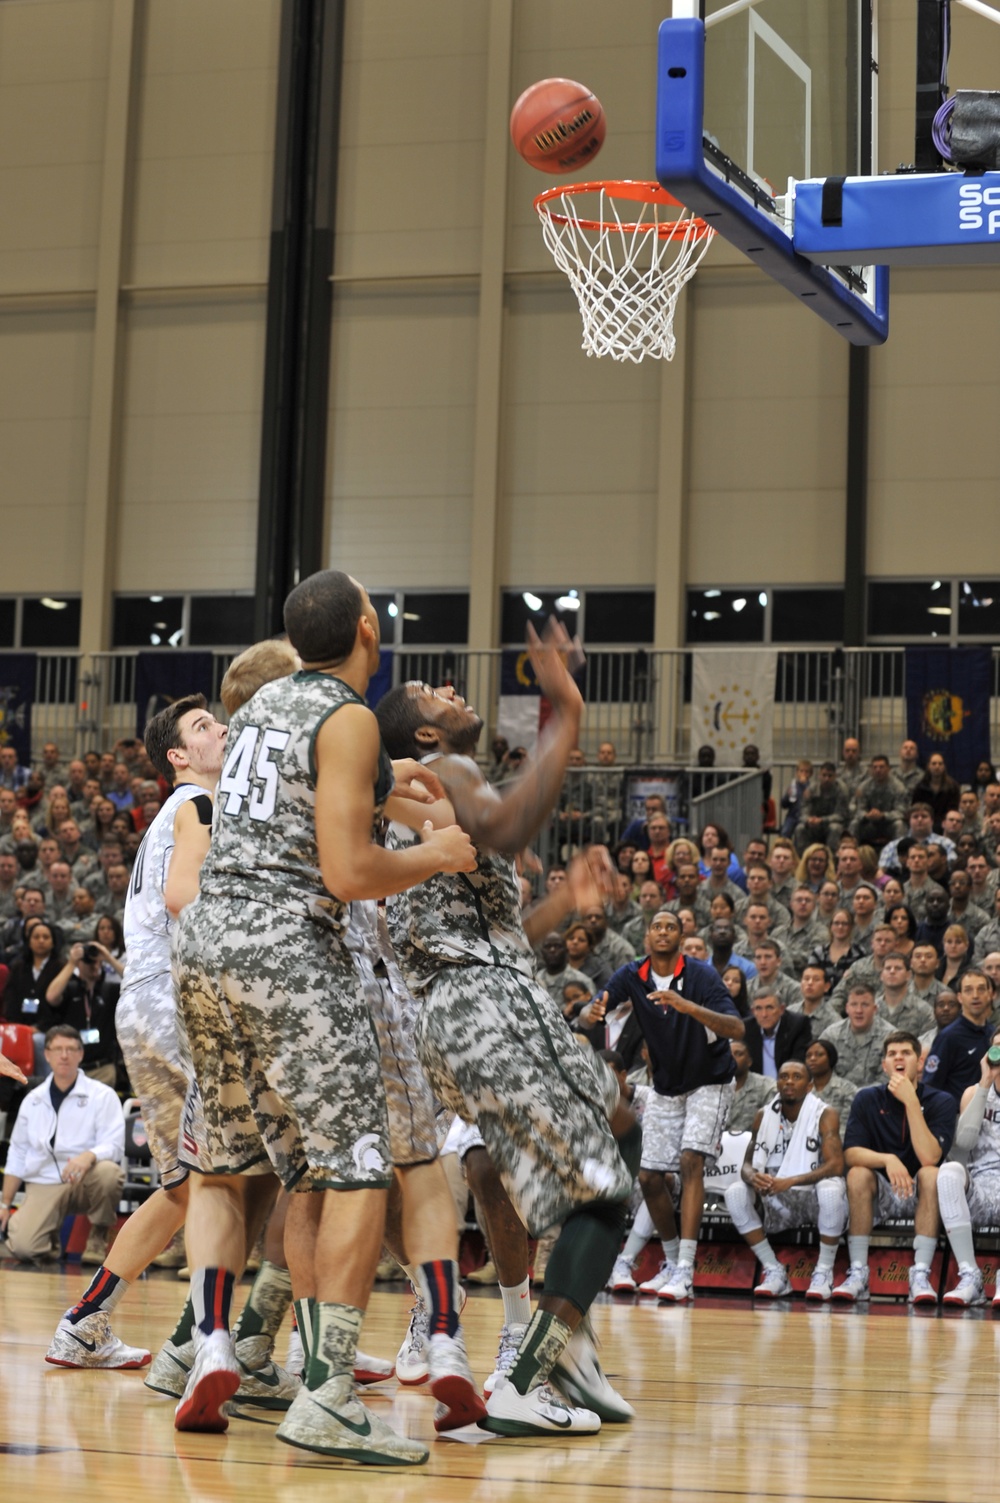 Huskies edge out Spartans 66-62 in Armed Forces Classic